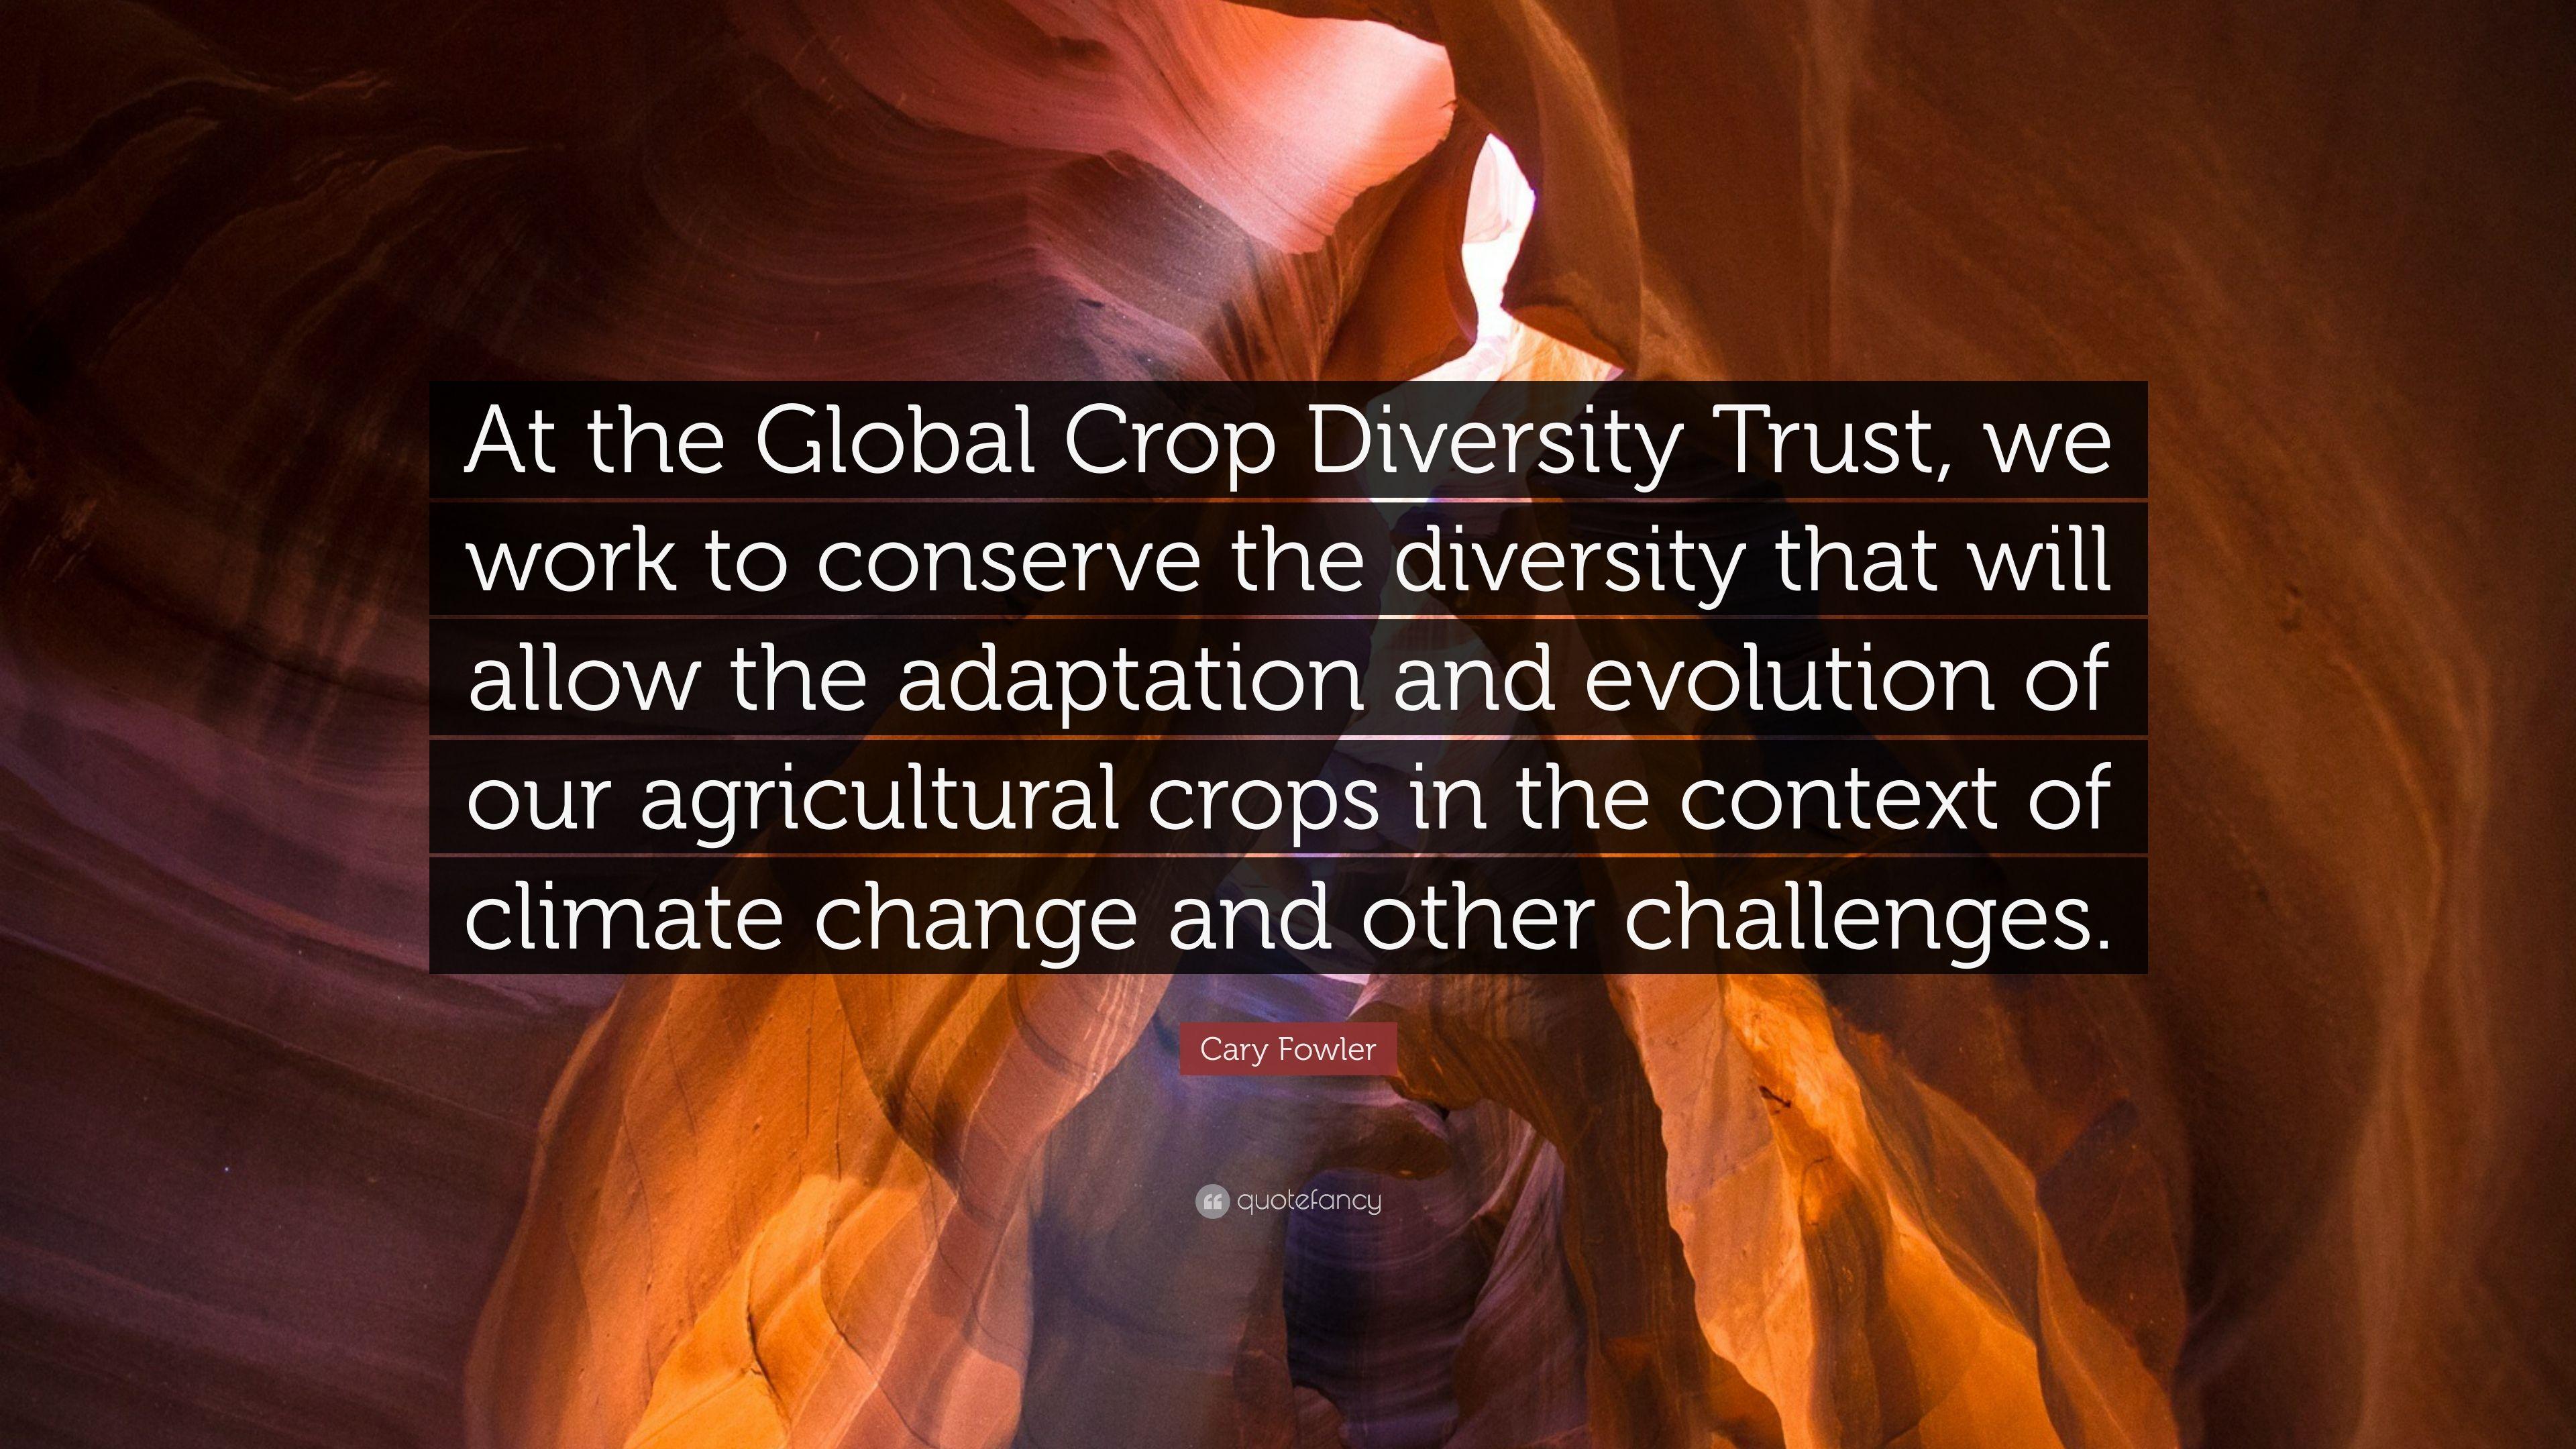 Cary Fowler Quote: “At the Global Crop Diversity Trust, we work to